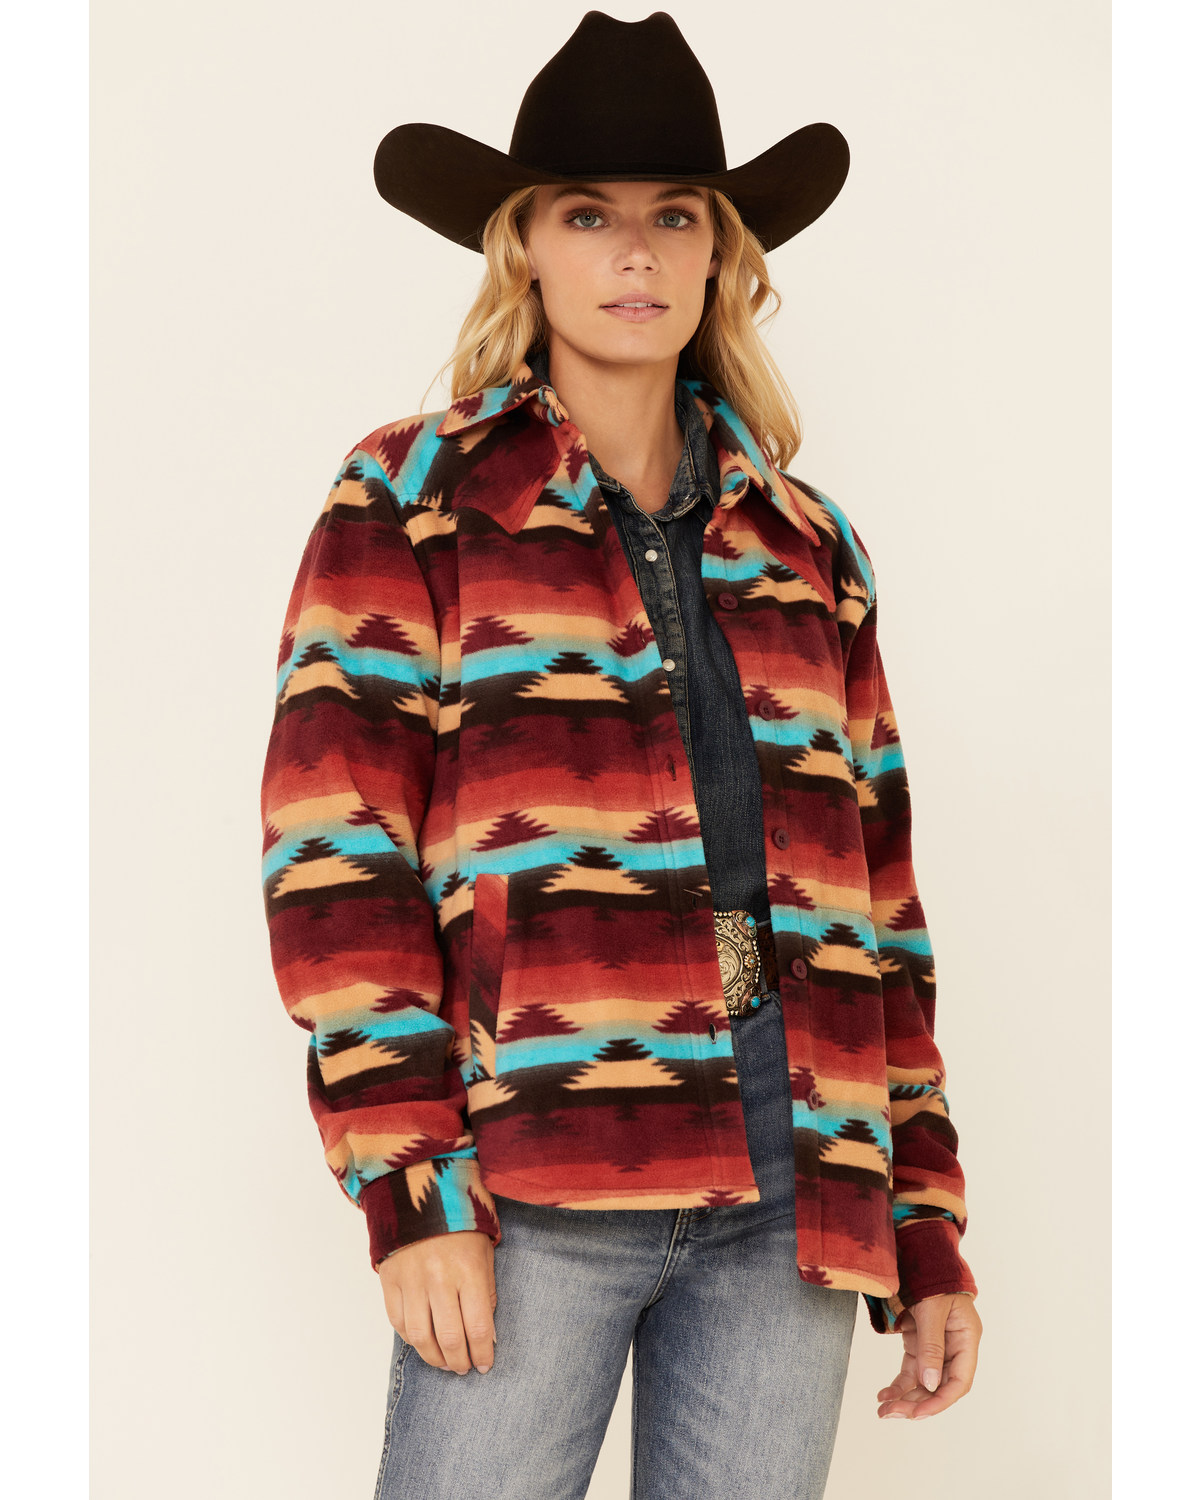 Outback Trading Co. Women's Southwestern Print Long Sleeve Button Down Western Big Shirt